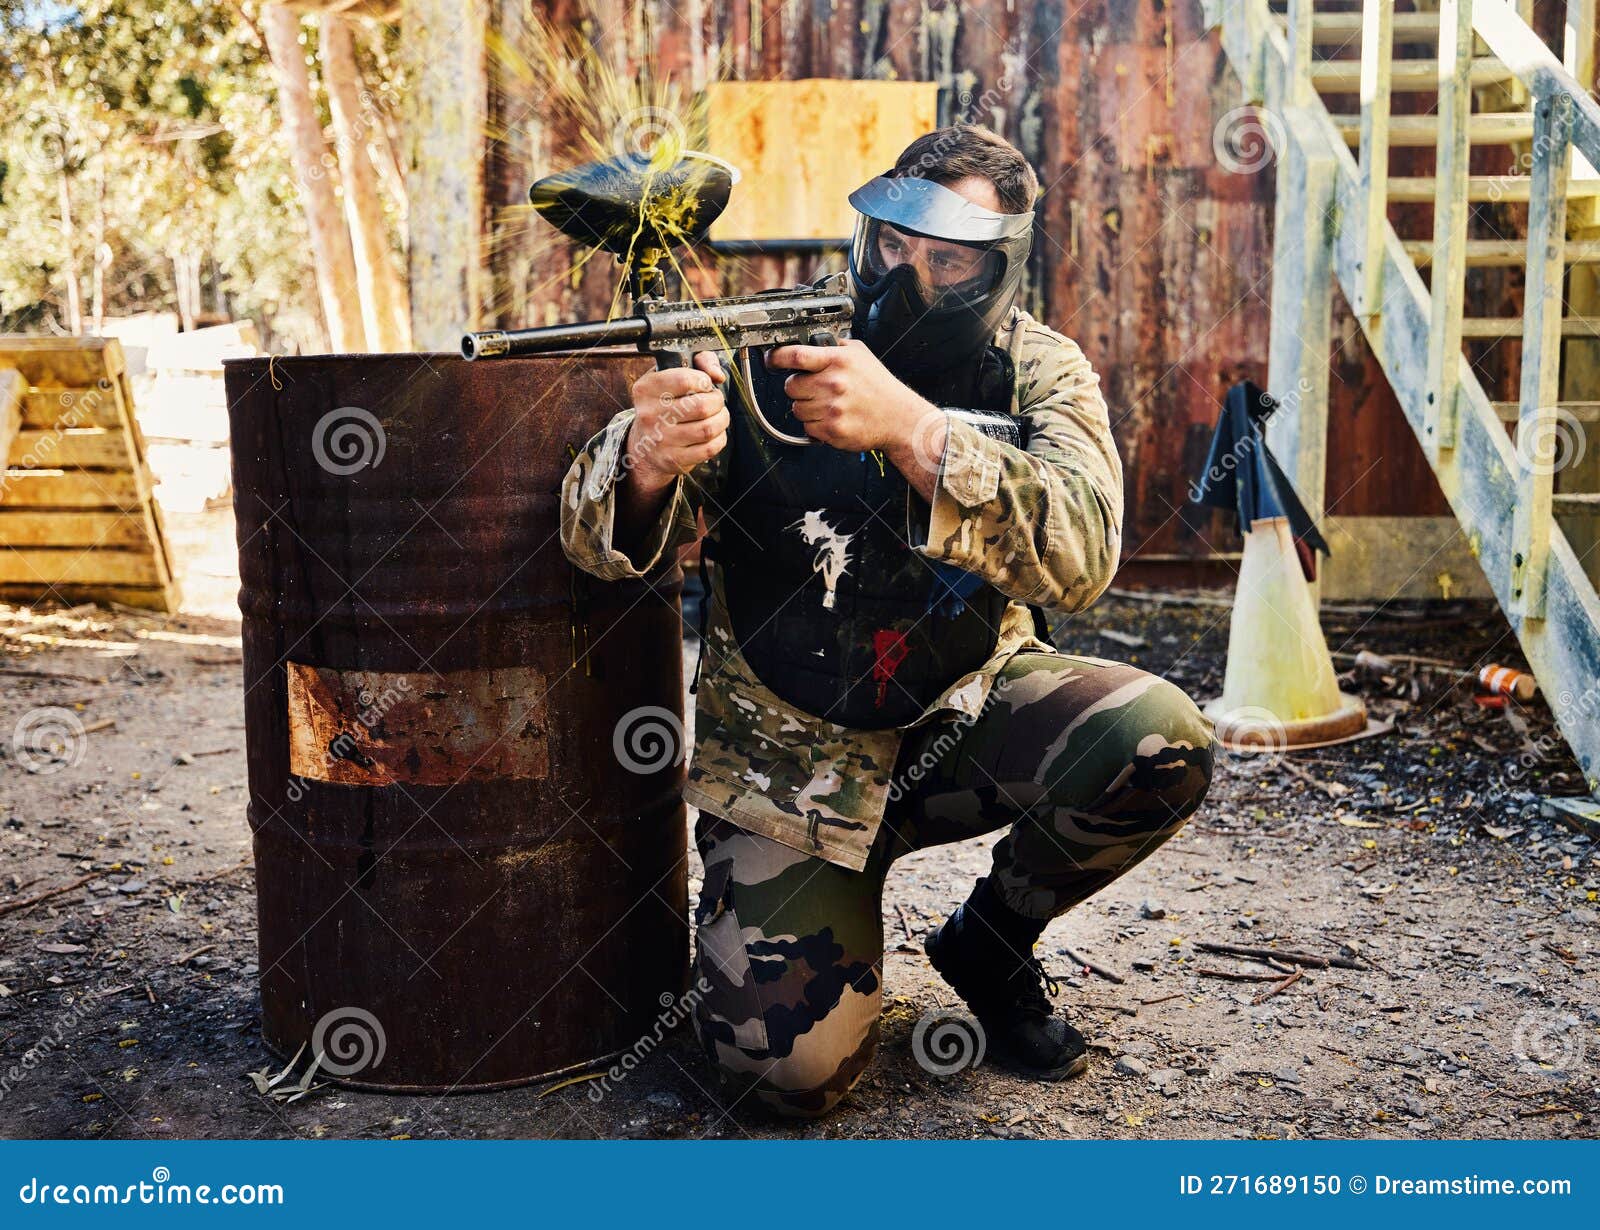 Paintball, Target Training or Male with Gun in Shooting Game Playing with on Fun Battlefield Mission